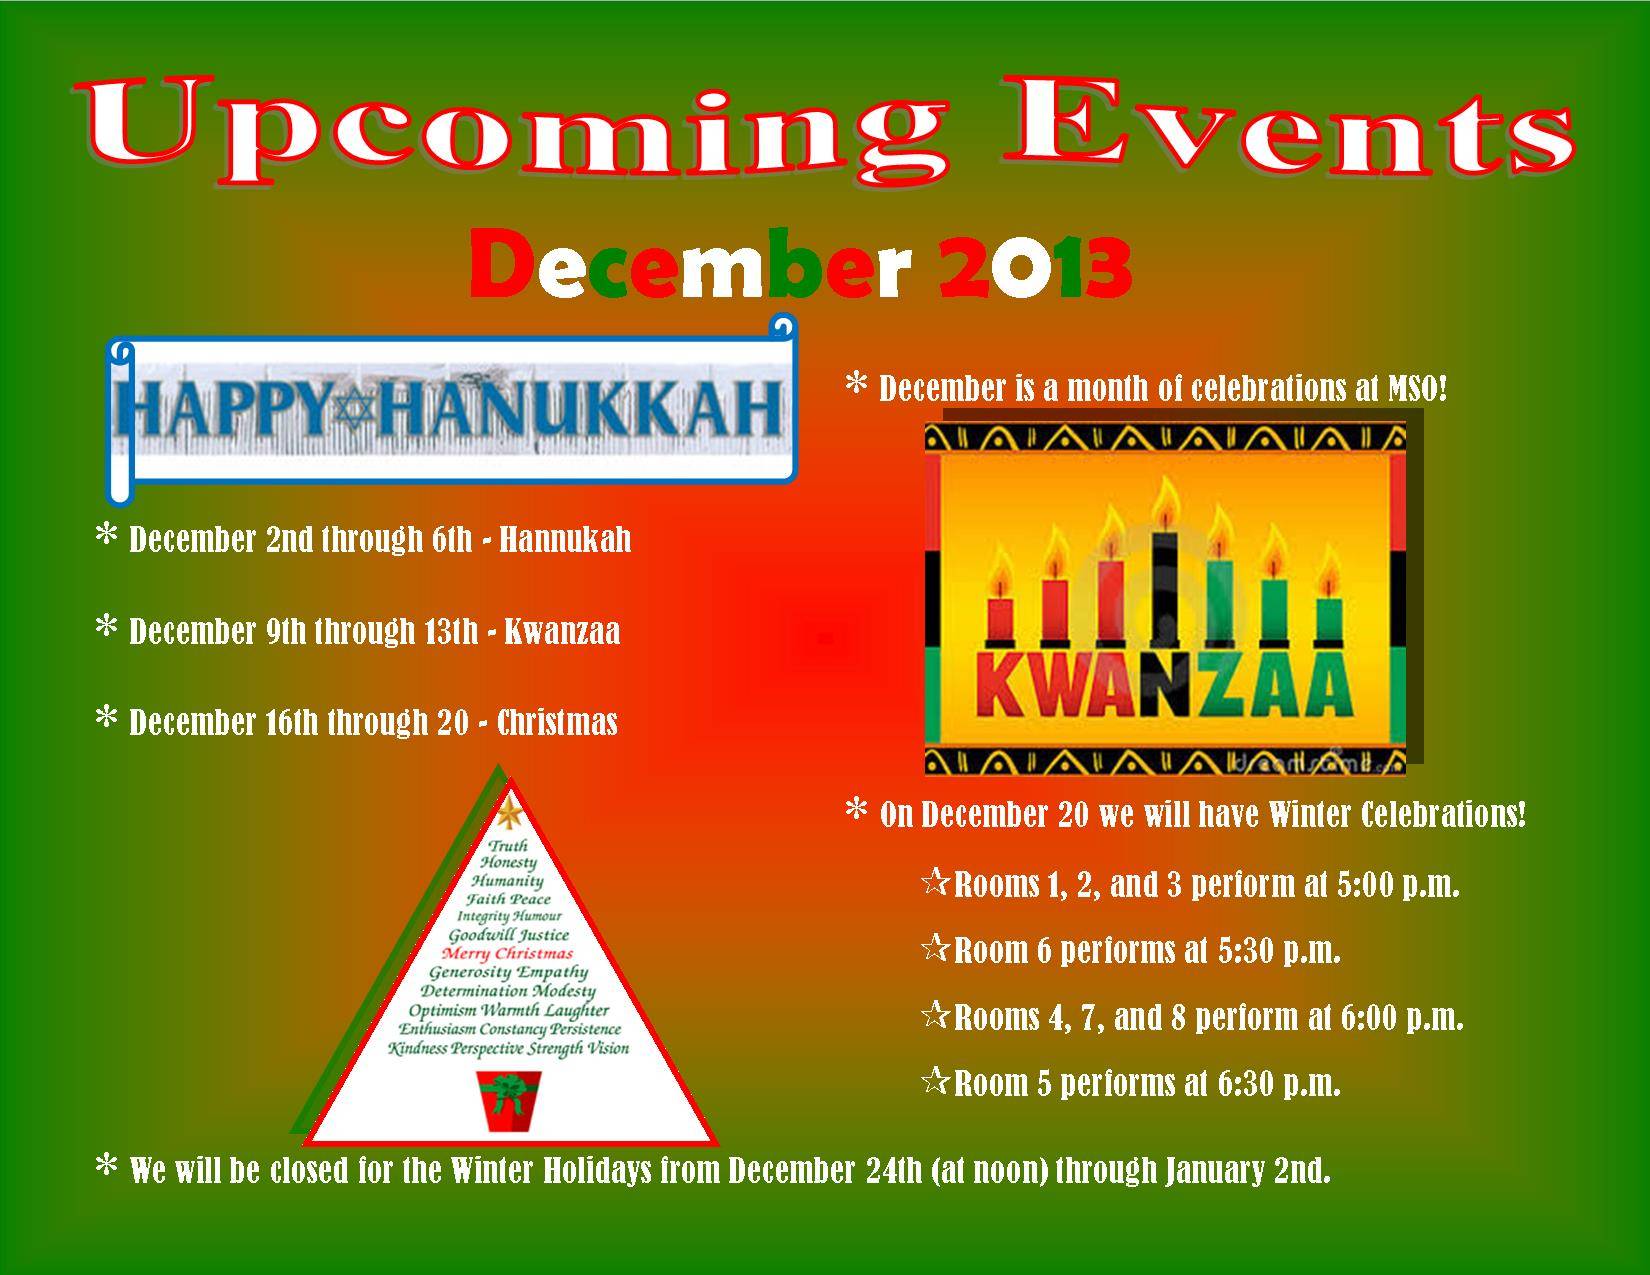 Upcoming Events - December 2013